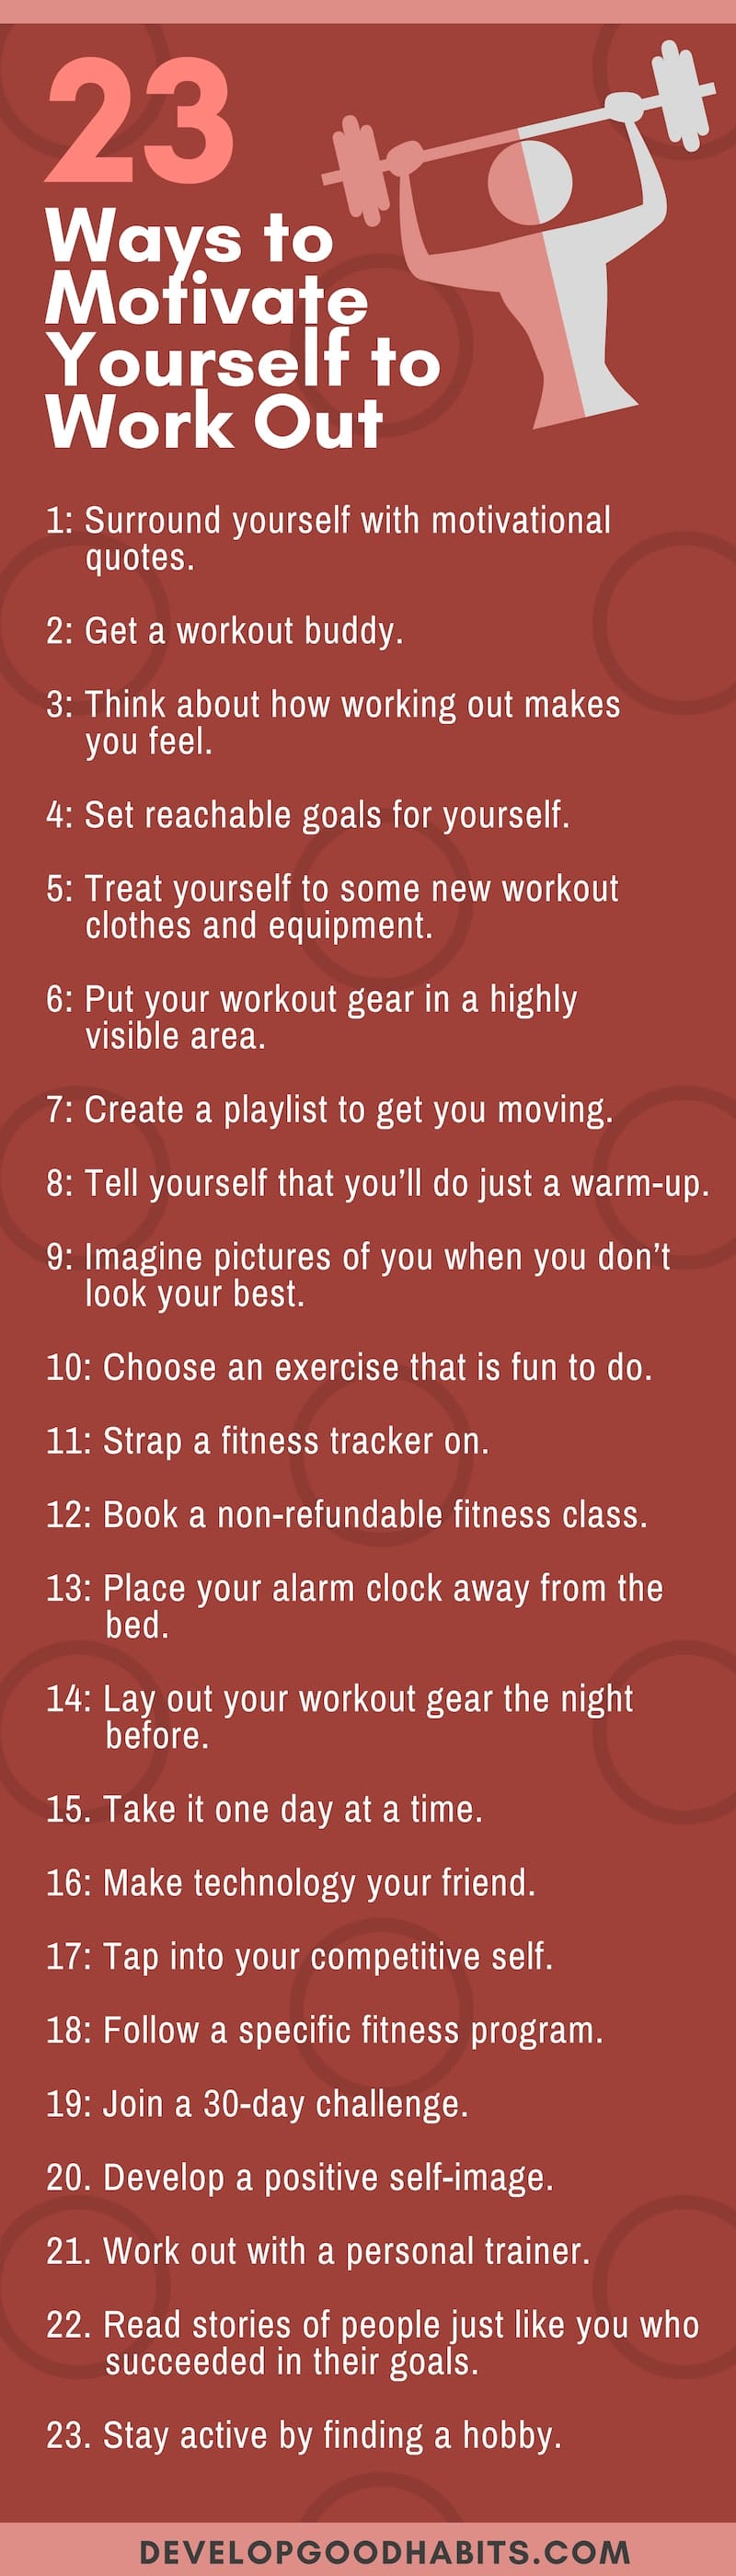 How to Motivate Yourself to Workout Alone?